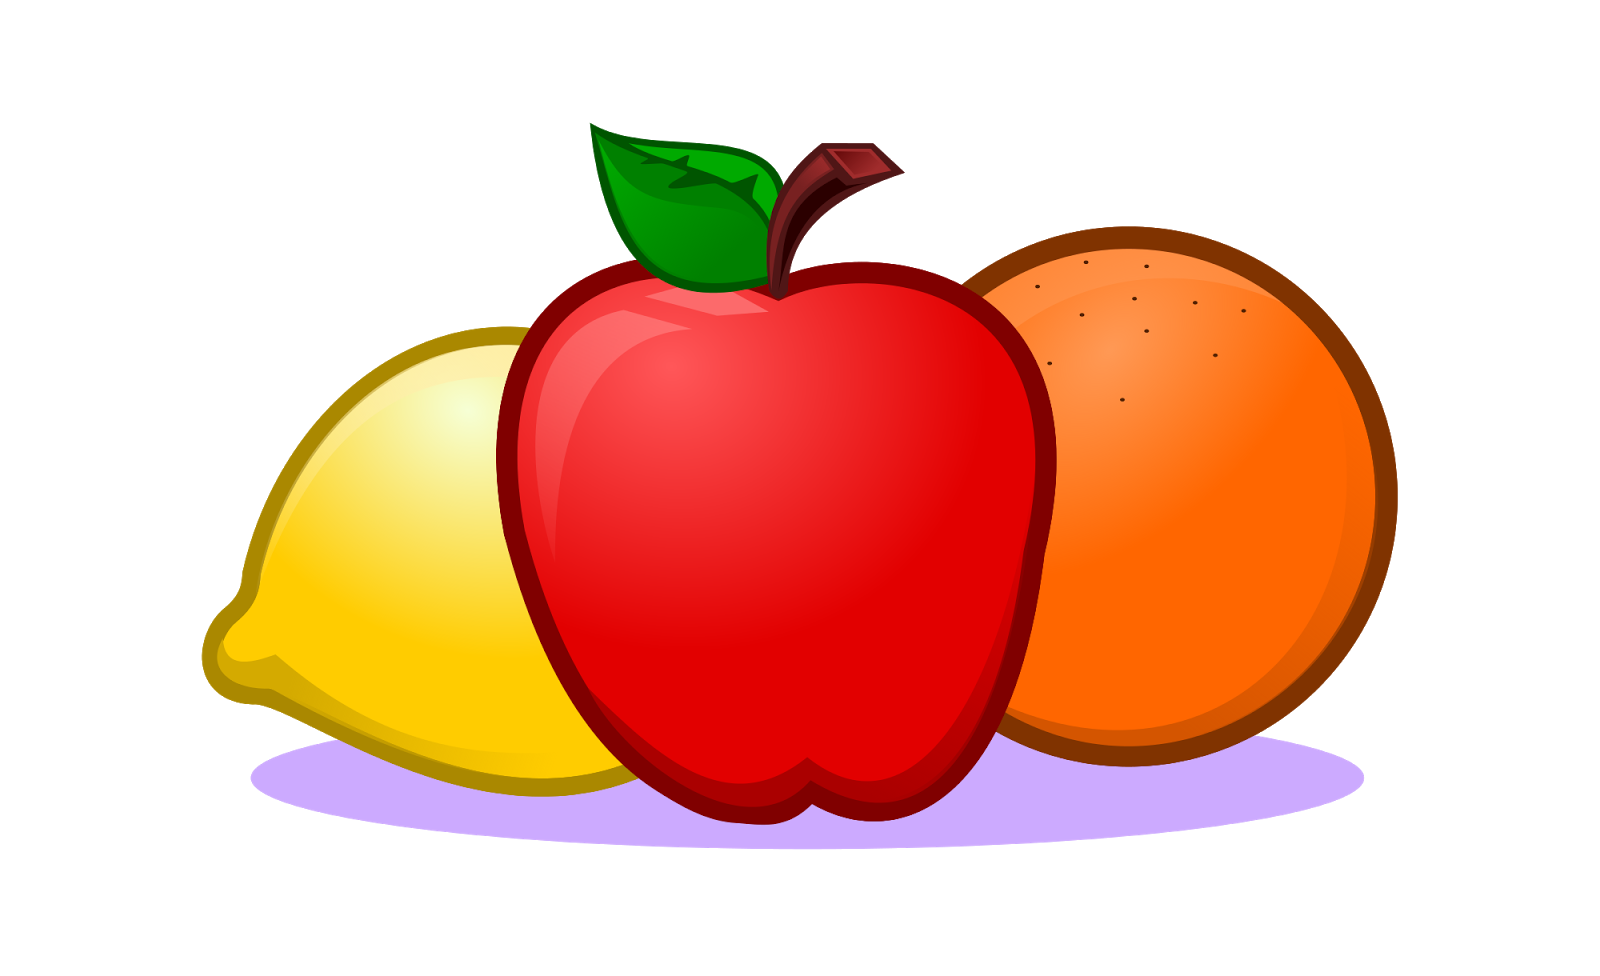 Fruits gifts of nature. Feast clipart nutritious food